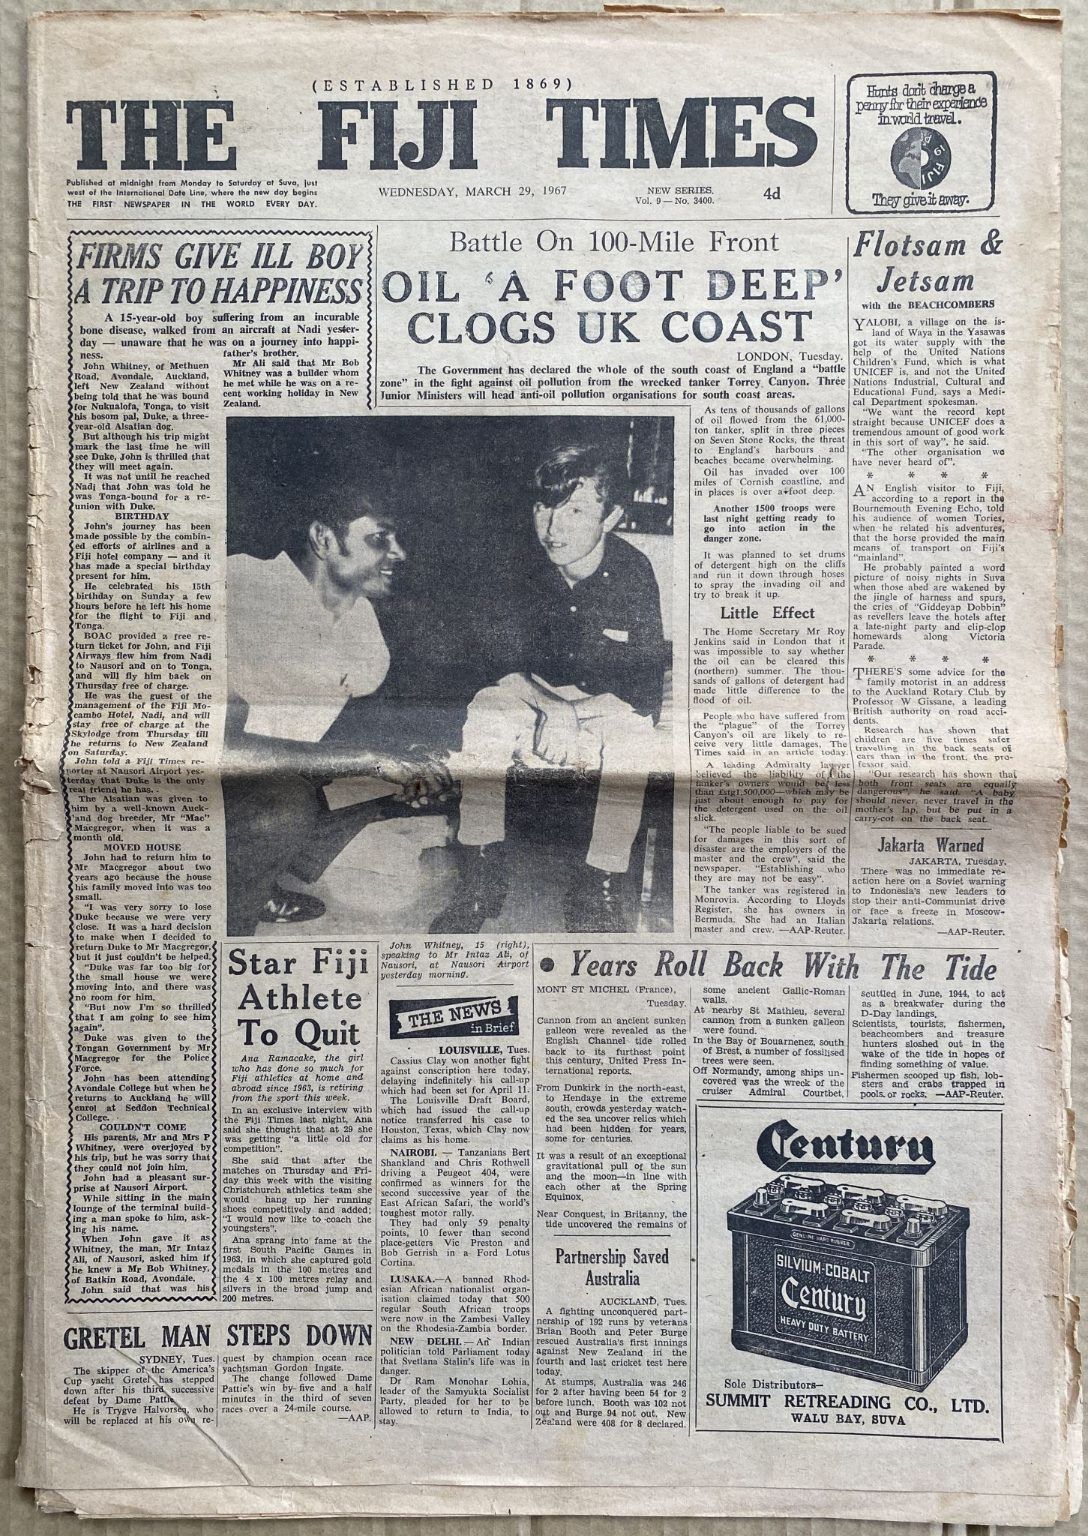 OLD NEWSPAPER: The Fiji Times, 29 March 1967